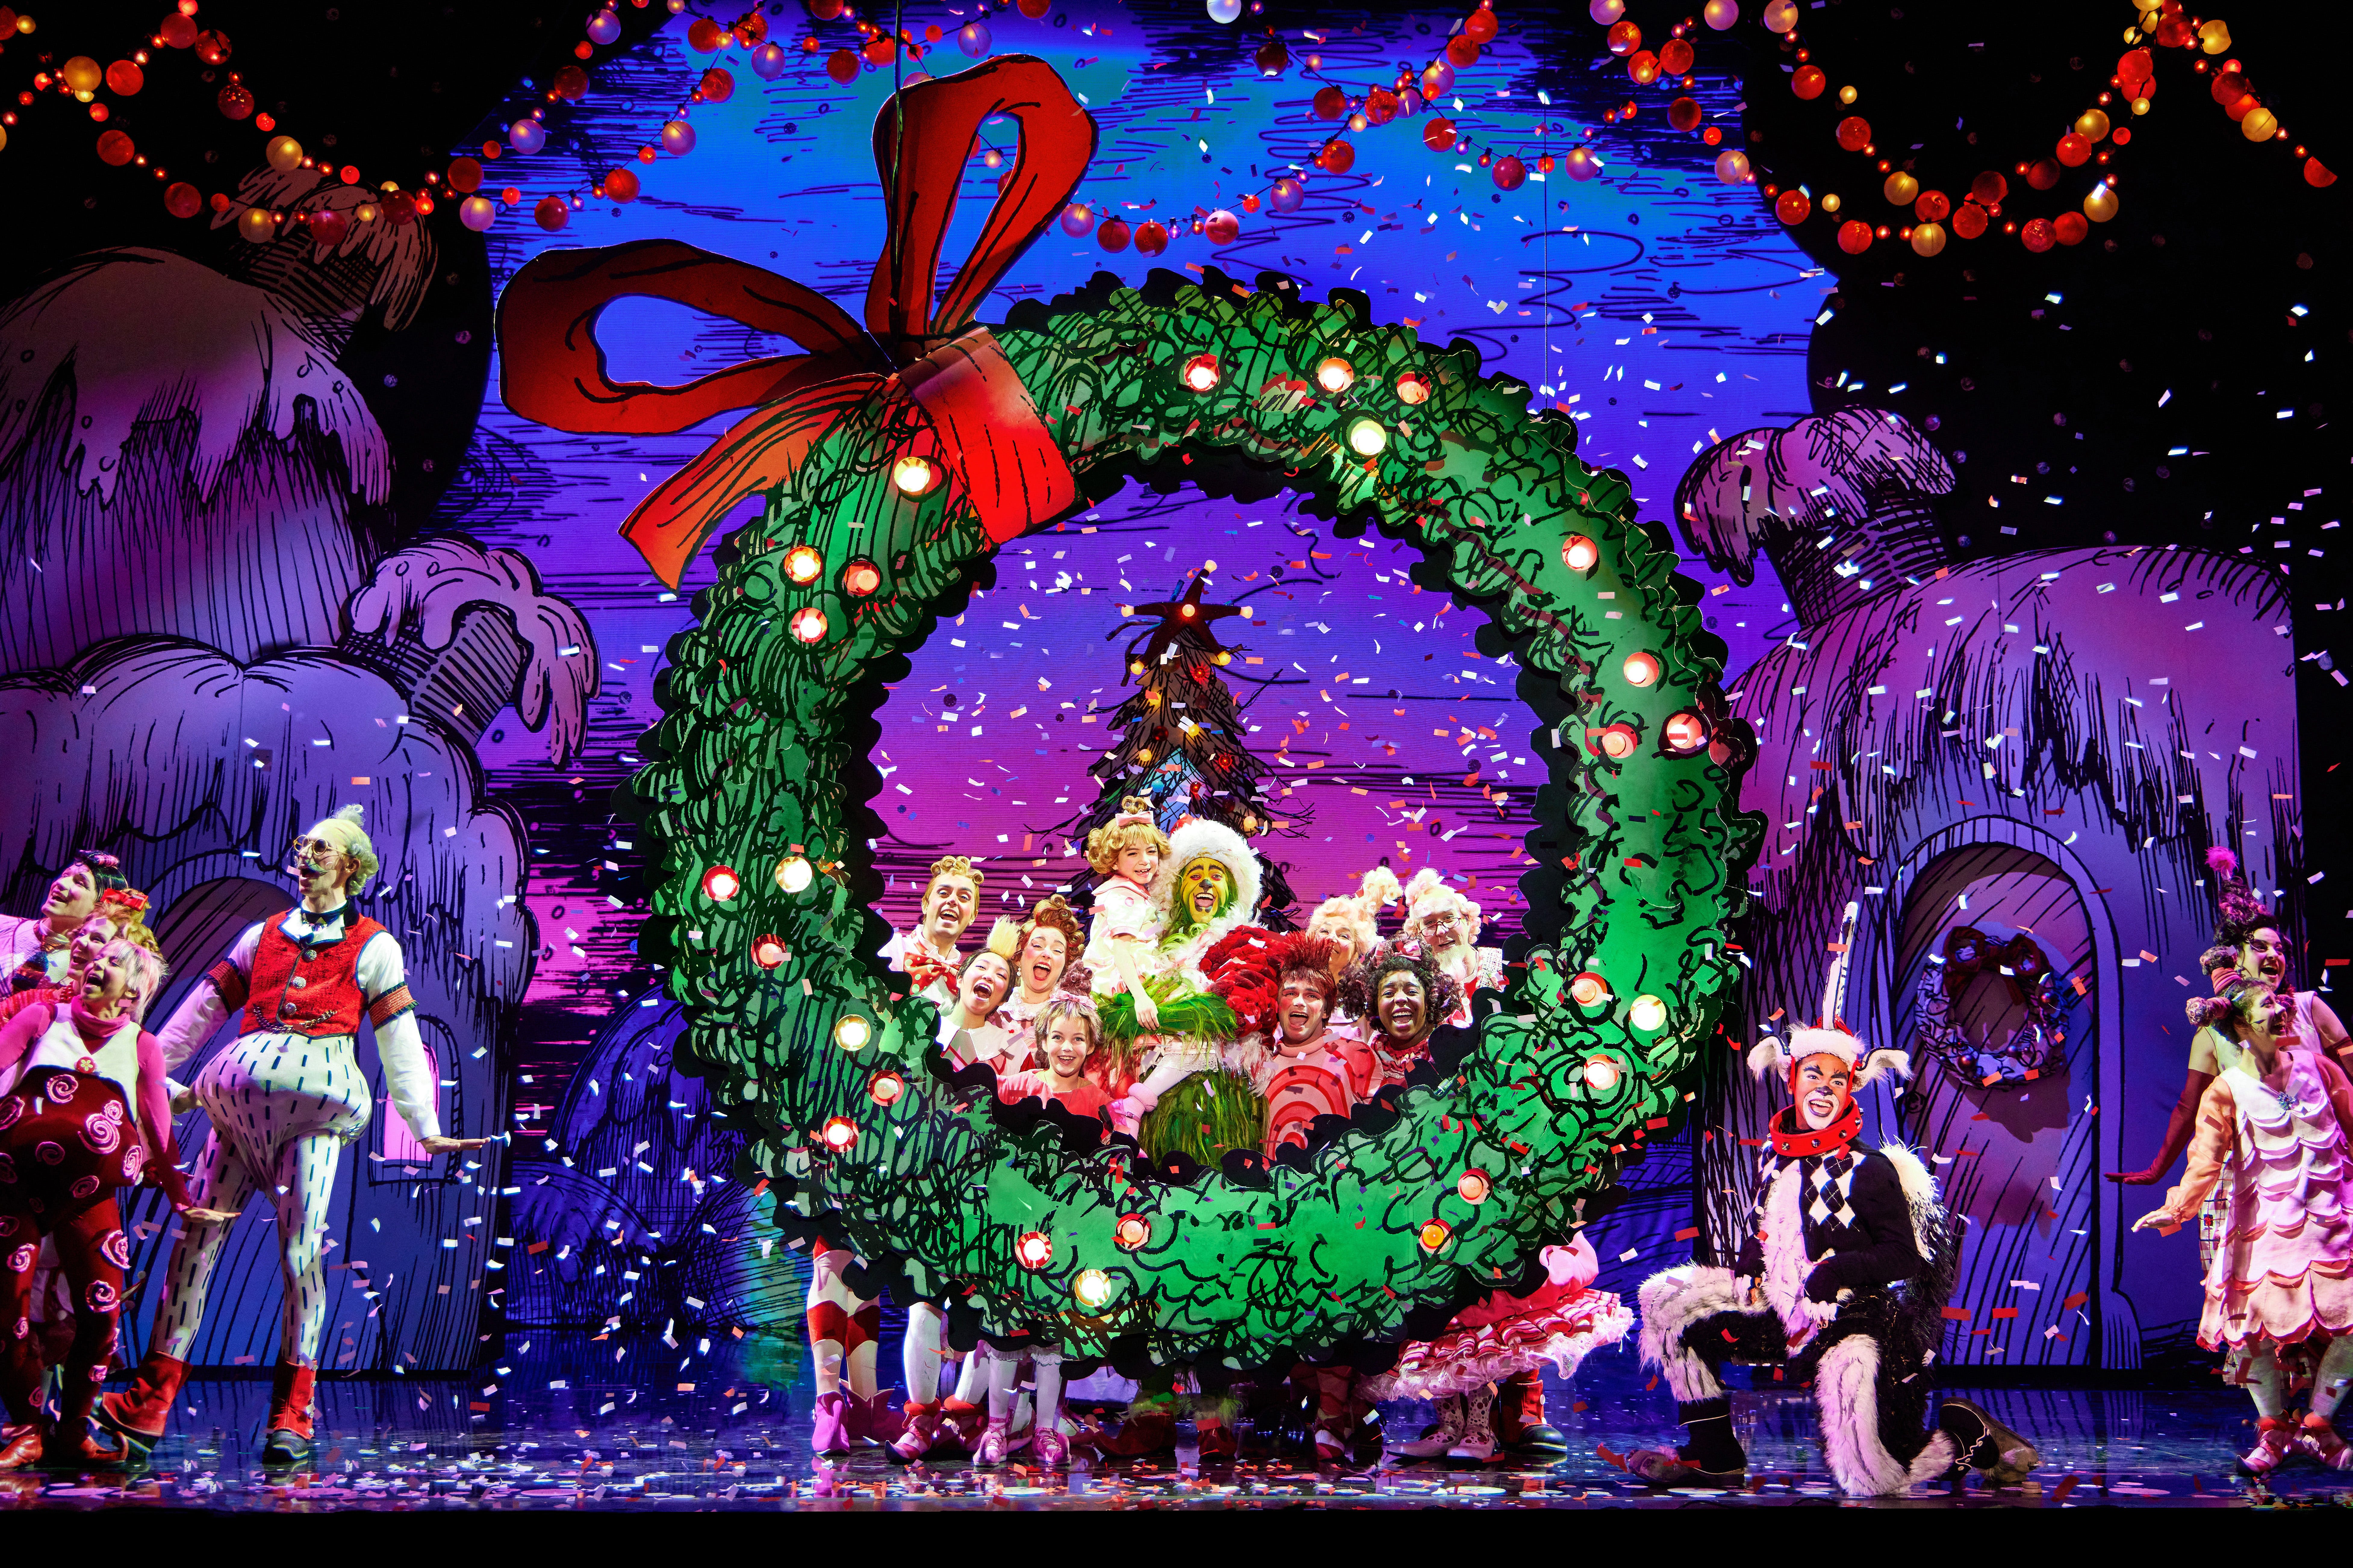 This holiday season, the Grinch is stealing Columbus' Christmas with a musical adaptation